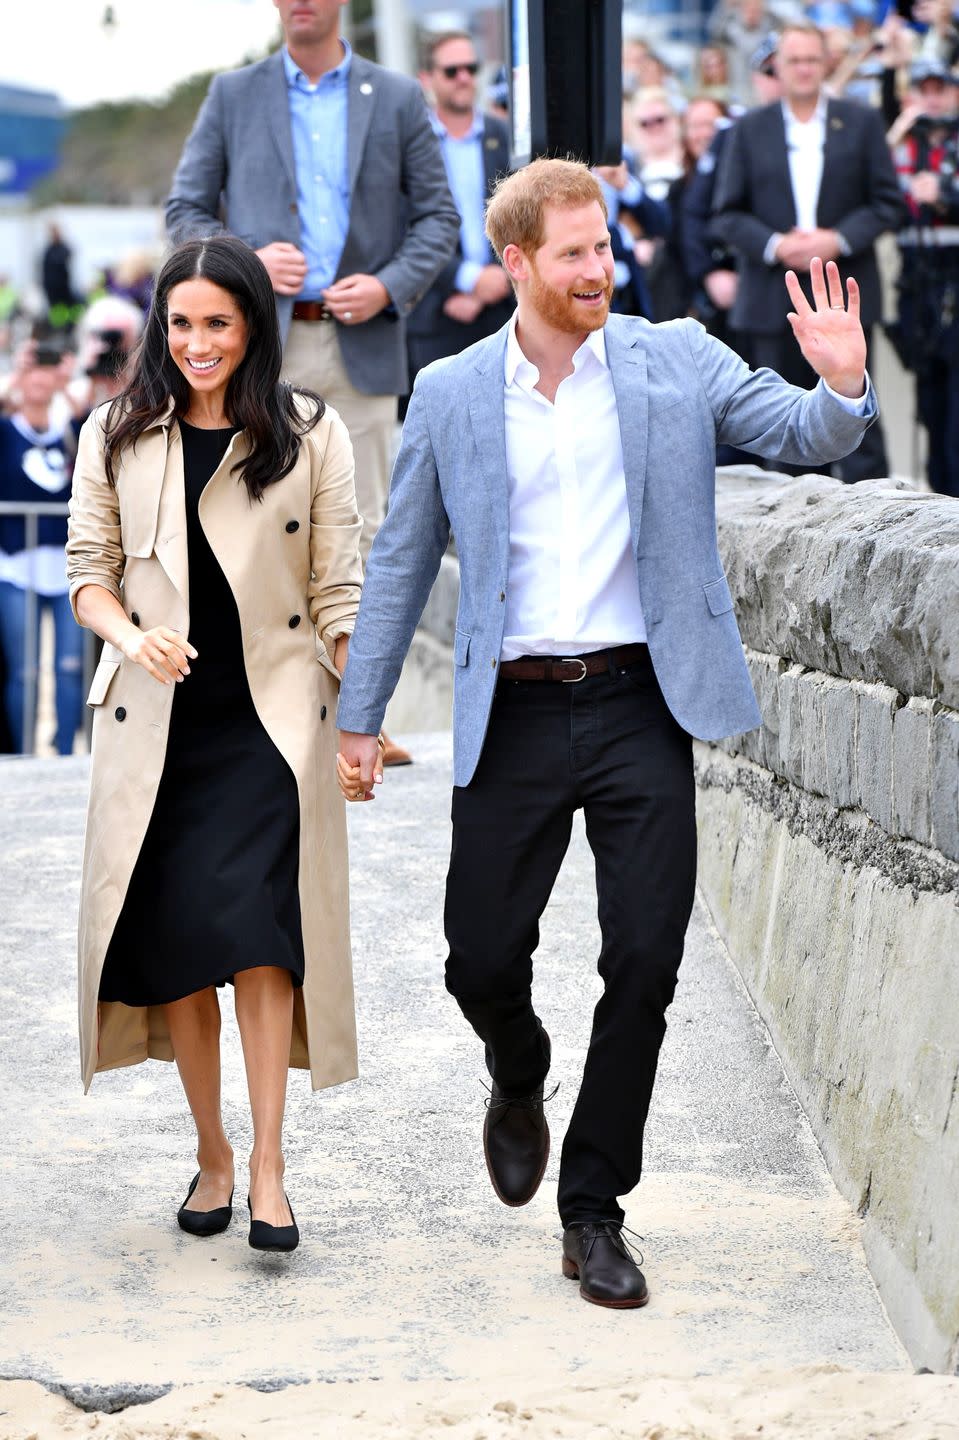 <p>Harry and Meghan <a href="https://www.townandcountrymag.com/society/tradition/g23871878/meghan-markle-prince-harry-royal-tour-melbourne-australia-day-3-photos/" rel="nofollow noopener" target="_blank" data-ylk="slk:later visited a beach;elm:context_link;itc:0;sec:content-canvas" class="link ">later visited a beach</a> in Melbourne, where they each changed into <a href="https://www.townandcountrymag.com/style/fashion-trends/a23890910/meghan-markle-club-monaco-dress-melbourne-australia-royal-tour-photos/" rel="nofollow noopener" target="_blank" data-ylk="slk:more casual outfits;elm:context_link;itc:0;sec:content-canvas" class="link ">more casual outfits</a>. For this event, the Duchess wore<a href="https://go.redirectingat.com?id=74968X1596630&url=http%3A%2F%2Fwww.clubmonaco.com%2Fproduct%2Findex.jsp%3FproductId%3D157223966%26size%3D10%252C4%252C8%252C00%252C6%252C2%252C12%252C0%26color%3D1174801&sref=https%3A%2F%2Fwww.townandcountrymag.com%2Fstyle%2Ffashion-trends%2Fg3272%2Fmeghan-markle-preppy-style%2F" rel="nofollow noopener" target="_blank" data-ylk="slk:a sleek black dress;elm:context_link;itc:0;sec:content-canvas" class="link "> a sleek black dress</a> by Club Monaco with a pair of pointed toe flats by Rothy's.<br></p><p><a class="link " href="https://go.redirectingat.com?id=74968X1596630&url=http%3A%2F%2Fwww.clubmonaco.com%2Fproduct%2Findex.jsp%3FproductId%3D157223966&sref=https%3A%2F%2Fwww.townandcountrymag.com%2Fstyle%2Ffashion-trends%2Fg3272%2Fmeghan-markle-preppy-style%2F" rel="nofollow noopener" target="_blank" data-ylk="slk:SHOP NOW;elm:context_link;itc:0;sec:content-canvas">SHOP NOW</a> <em>Miguellina Dress by <em>Club Monaco</em>, $268</em></p><p><a class="link " href="https://go.redirectingat.com?id=74968X1596630&url=https%3A%2F%2Frothys.com%2Fproducts%2Fthe-point-black-solid%3FsiteID%3DTnL5HPStwNw-SRqL_yTmfs9XjHG3noa4Zg&sref=https%3A%2F%2Fwww.townandcountrymag.com%2Fstyle%2Ffashion-trends%2Fg3272%2Fmeghan-markle-preppy-style%2F" rel="nofollow noopener" target="_blank" data-ylk="slk:SHOP NOW;elm:context_link;itc:0;sec:content-canvas">SHOP NOW </a><em>Black Solid Flats by Rothy's, $145 </em></p>